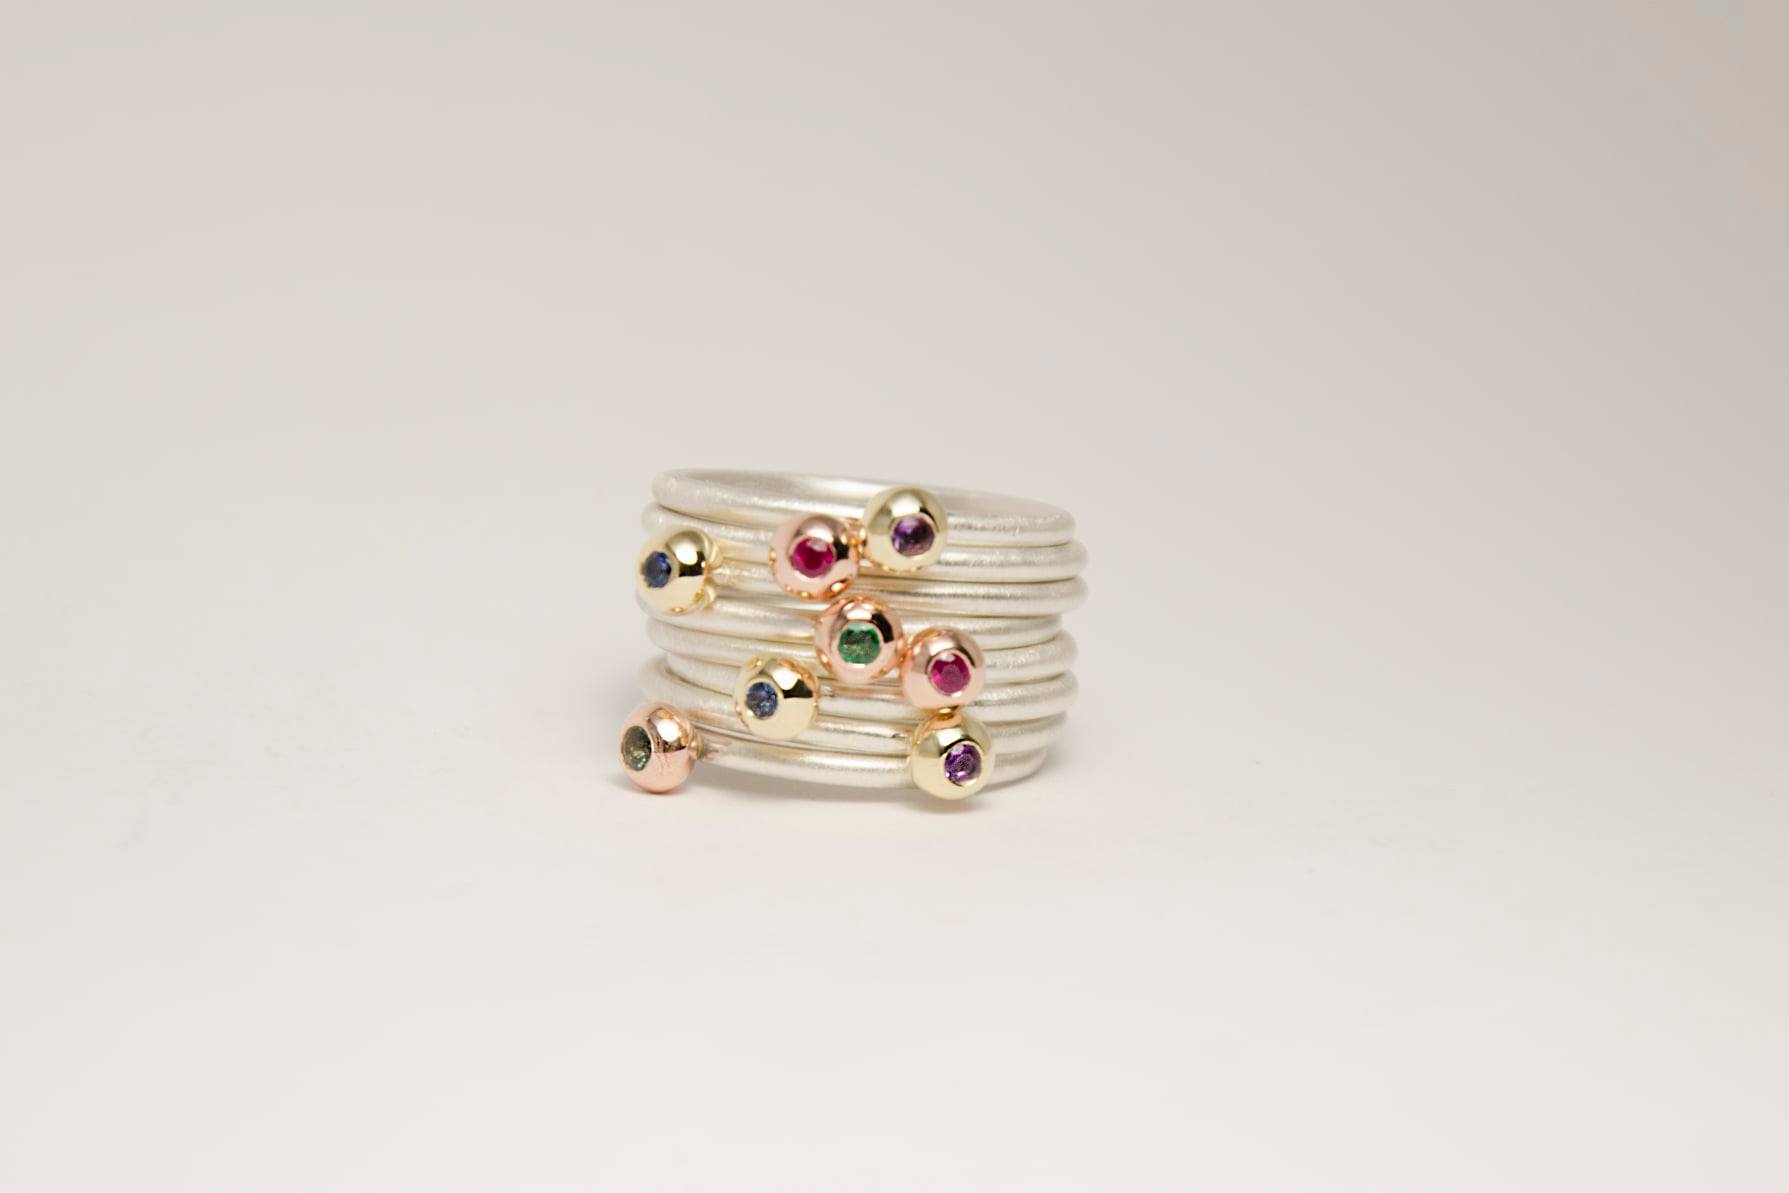 Jewellery Rings Solitaire Rings Arabesque crocheted ring with labradorite in rose gold-plated silver or gold 